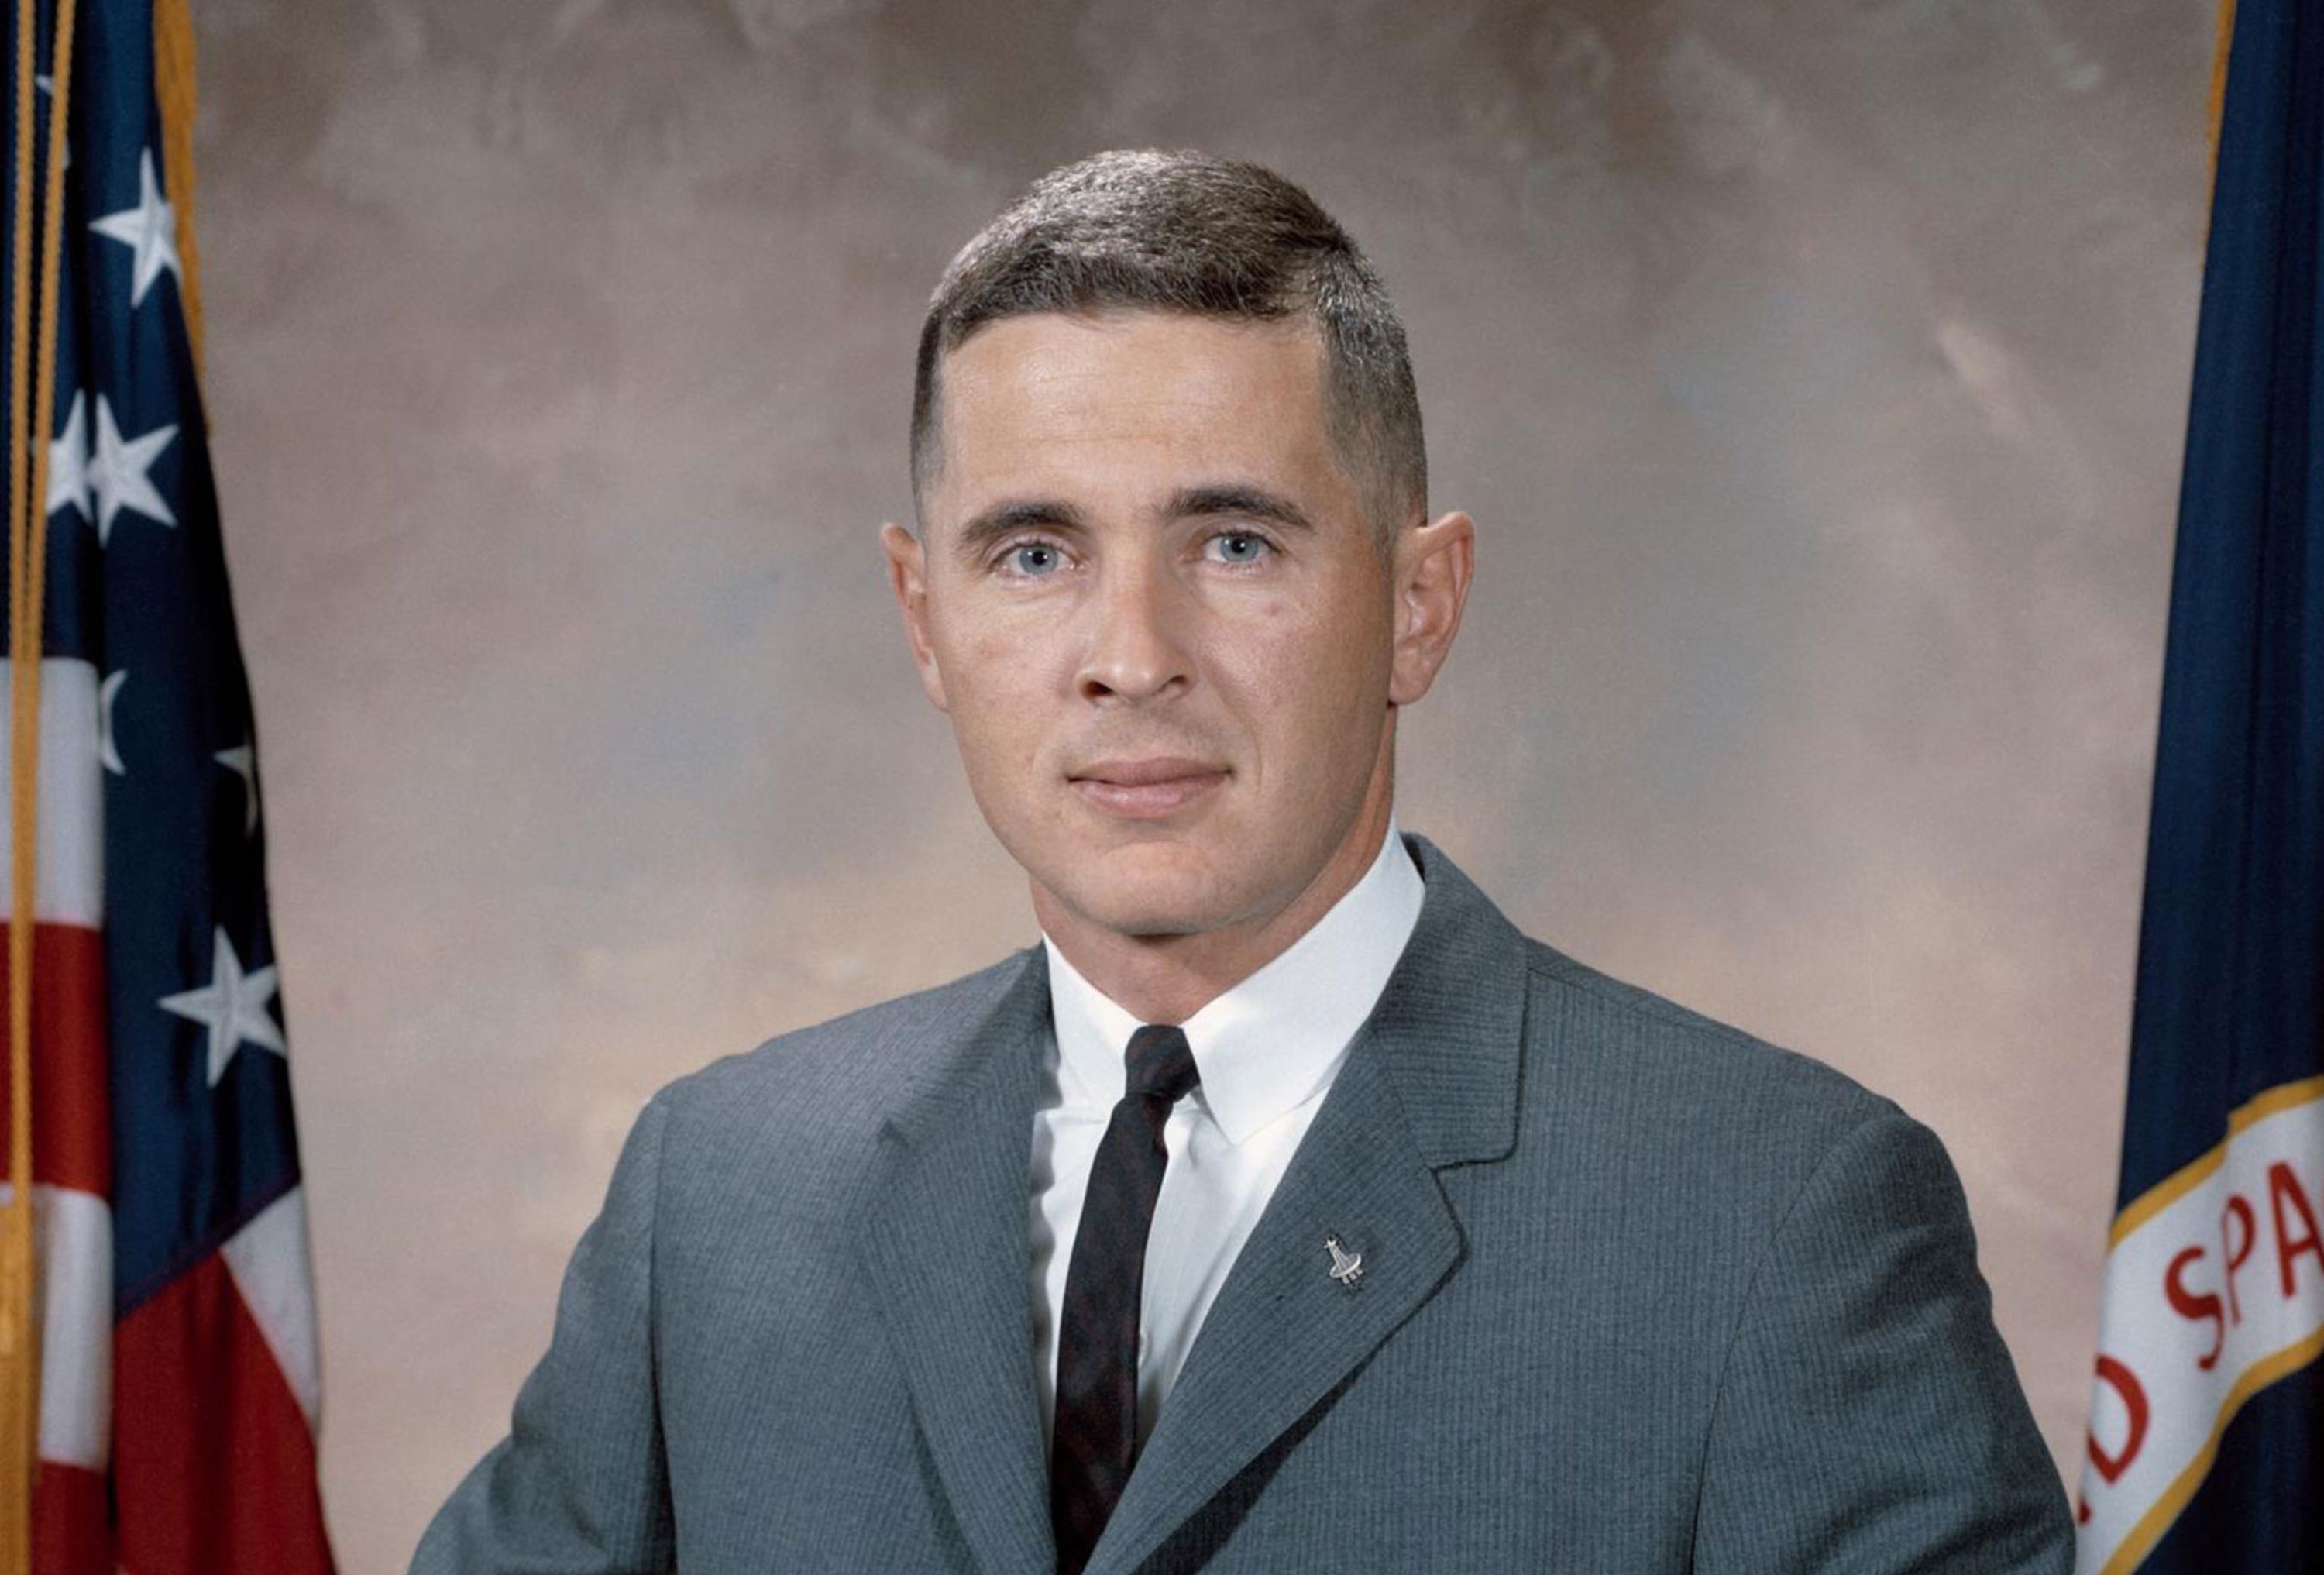 <a href="index.php?page=&url=https%3A%2F%2Fwww.cnn.com%2F2024%2F06%2F07%2Fscience%2Fapollo-8-astronaut-william-anders-reportedly-killed-in-plane-crash%2Findex.html" target="_blank">William Anders</a>, a NASA astronaut who was part of the 1968 Apollo 8 crew who were the first three people to orbit the moon, died in a plane crash in Washington state, his son confirmed on Friday, June 7. He was 90.